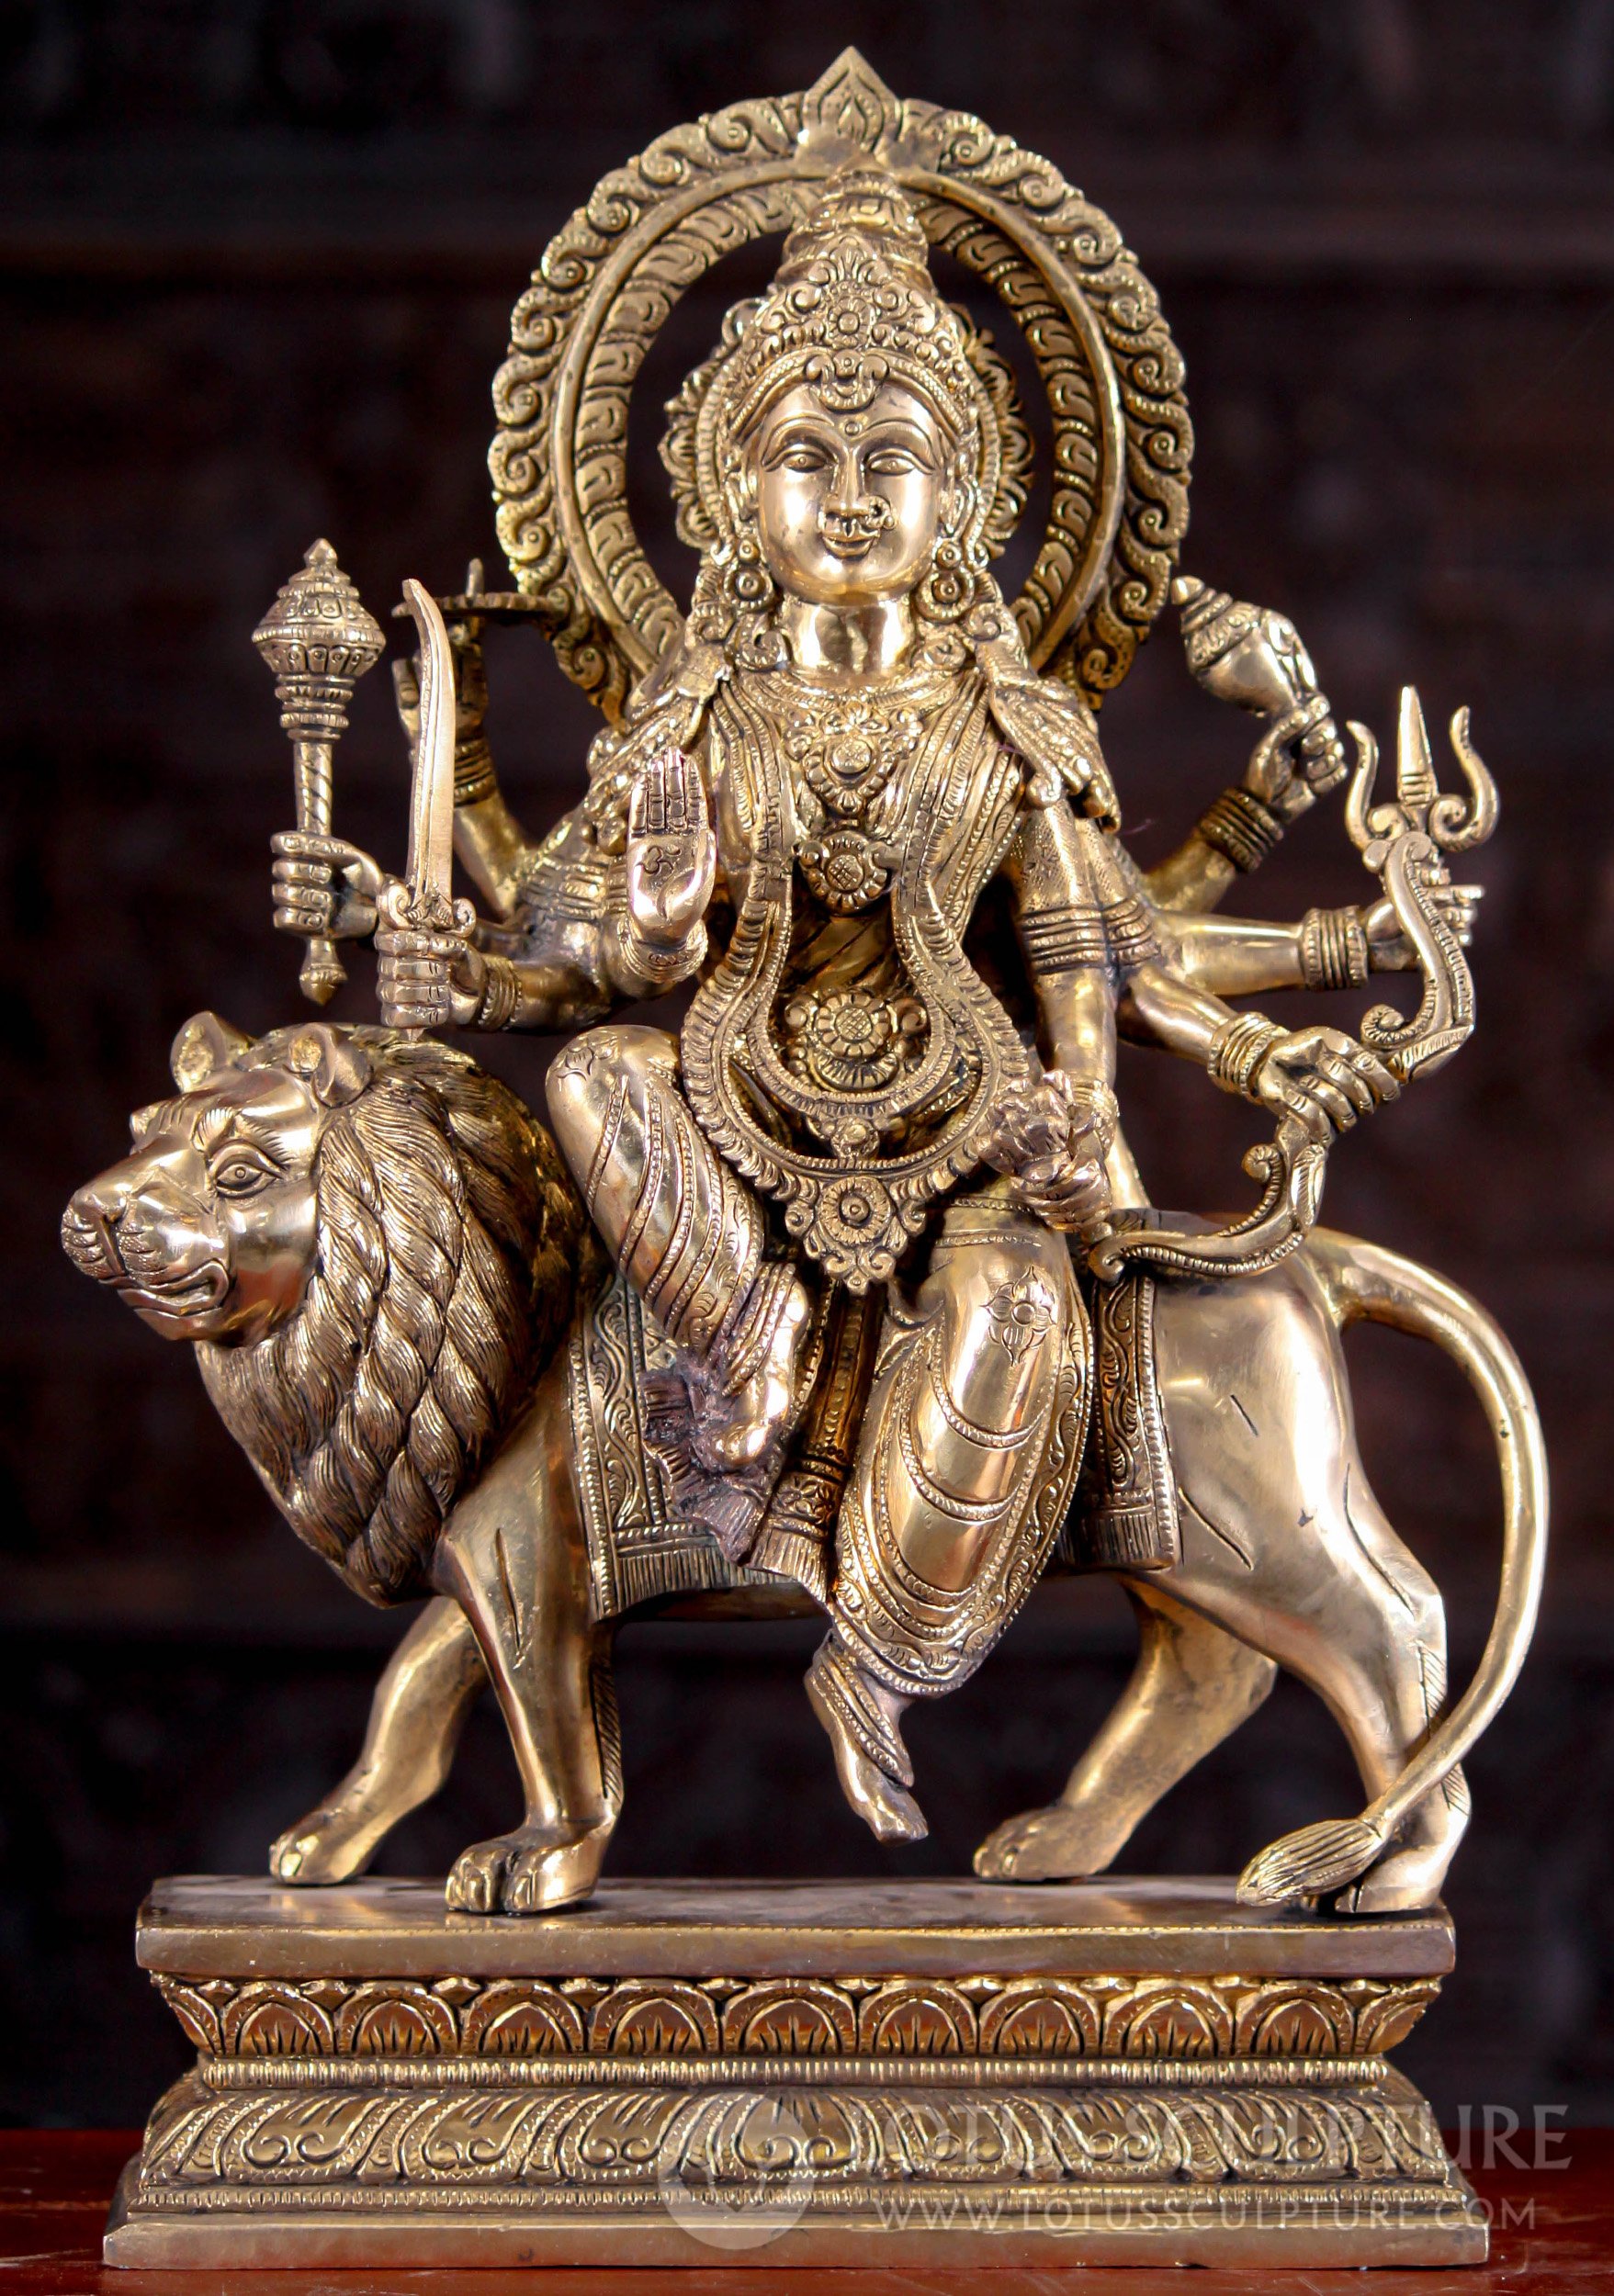 Brass Hindu Goddess Durga Statue Seated on Her Vehicle, a Lion with 8 Arms  Holding Weapons 17.5 (#160bs29z): Hindu Gods & Buddha Statues